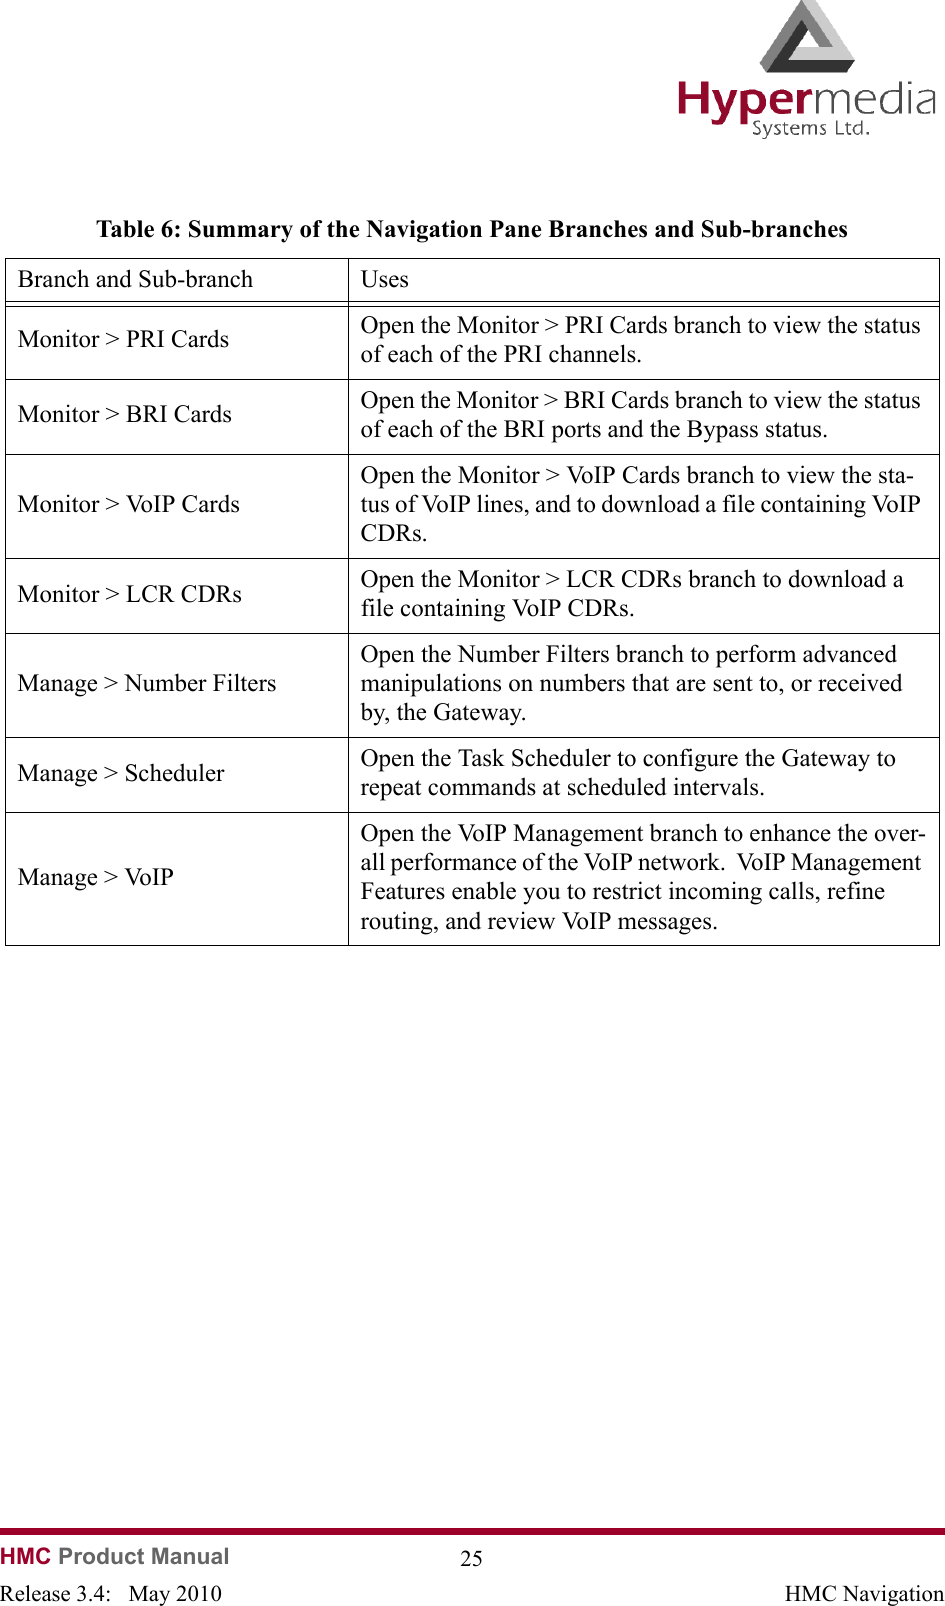 HMC Product Manual  25Release 3.4:   May 2010 HMC NavigationMonitor &gt; PRI Cards Open the Monitor &gt; PRI Cards branch to view the status of each of the PRI channels. Monitor &gt; BRI Cards Open the Monitor &gt; BRI Cards branch to view the status of each of the BRI ports and the Bypass status. Monitor &gt; VoIP CardsOpen the Monitor &gt; VoIP Cards branch to view the sta-tus of VoIP lines, and to download a file containing VoIP CDRs.Monitor &gt; LCR CDRs Open the Monitor &gt; LCR CDRs branch to download a file containing VoIP CDRs.Manage &gt; Number FiltersOpen the Number Filters branch to perform advanced manipulations on numbers that are sent to, or received by, the Gateway.  Manage &gt; Scheduler Open the Task Scheduler to configure the Gateway to repeat commands at scheduled intervals.  Manage &gt; VoIPOpen the VoIP Management branch to enhance the over-all performance of the VoIP network.  VoIP Management Features enable you to restrict incoming calls, refine routing, and review VoIP messages.Table 6: Summary of the Navigation Pane Branches and Sub-branchesBranch and Sub-branch Uses